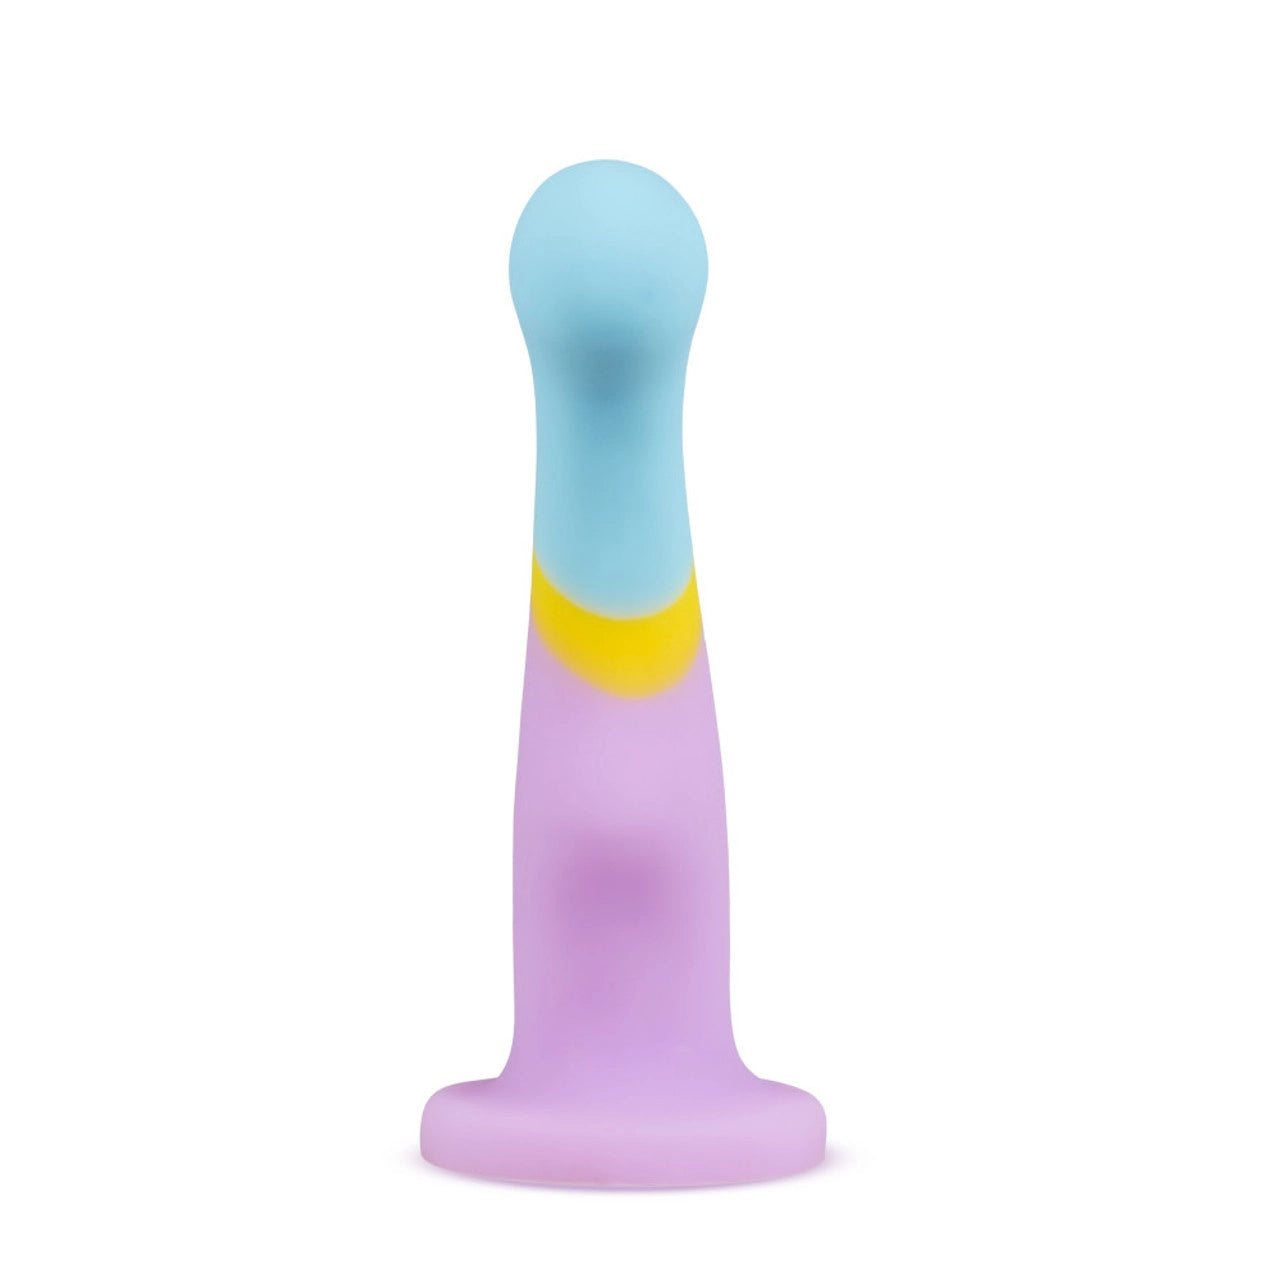 Avant D14 Heart Of Gold Silicone Dildo 6 inch